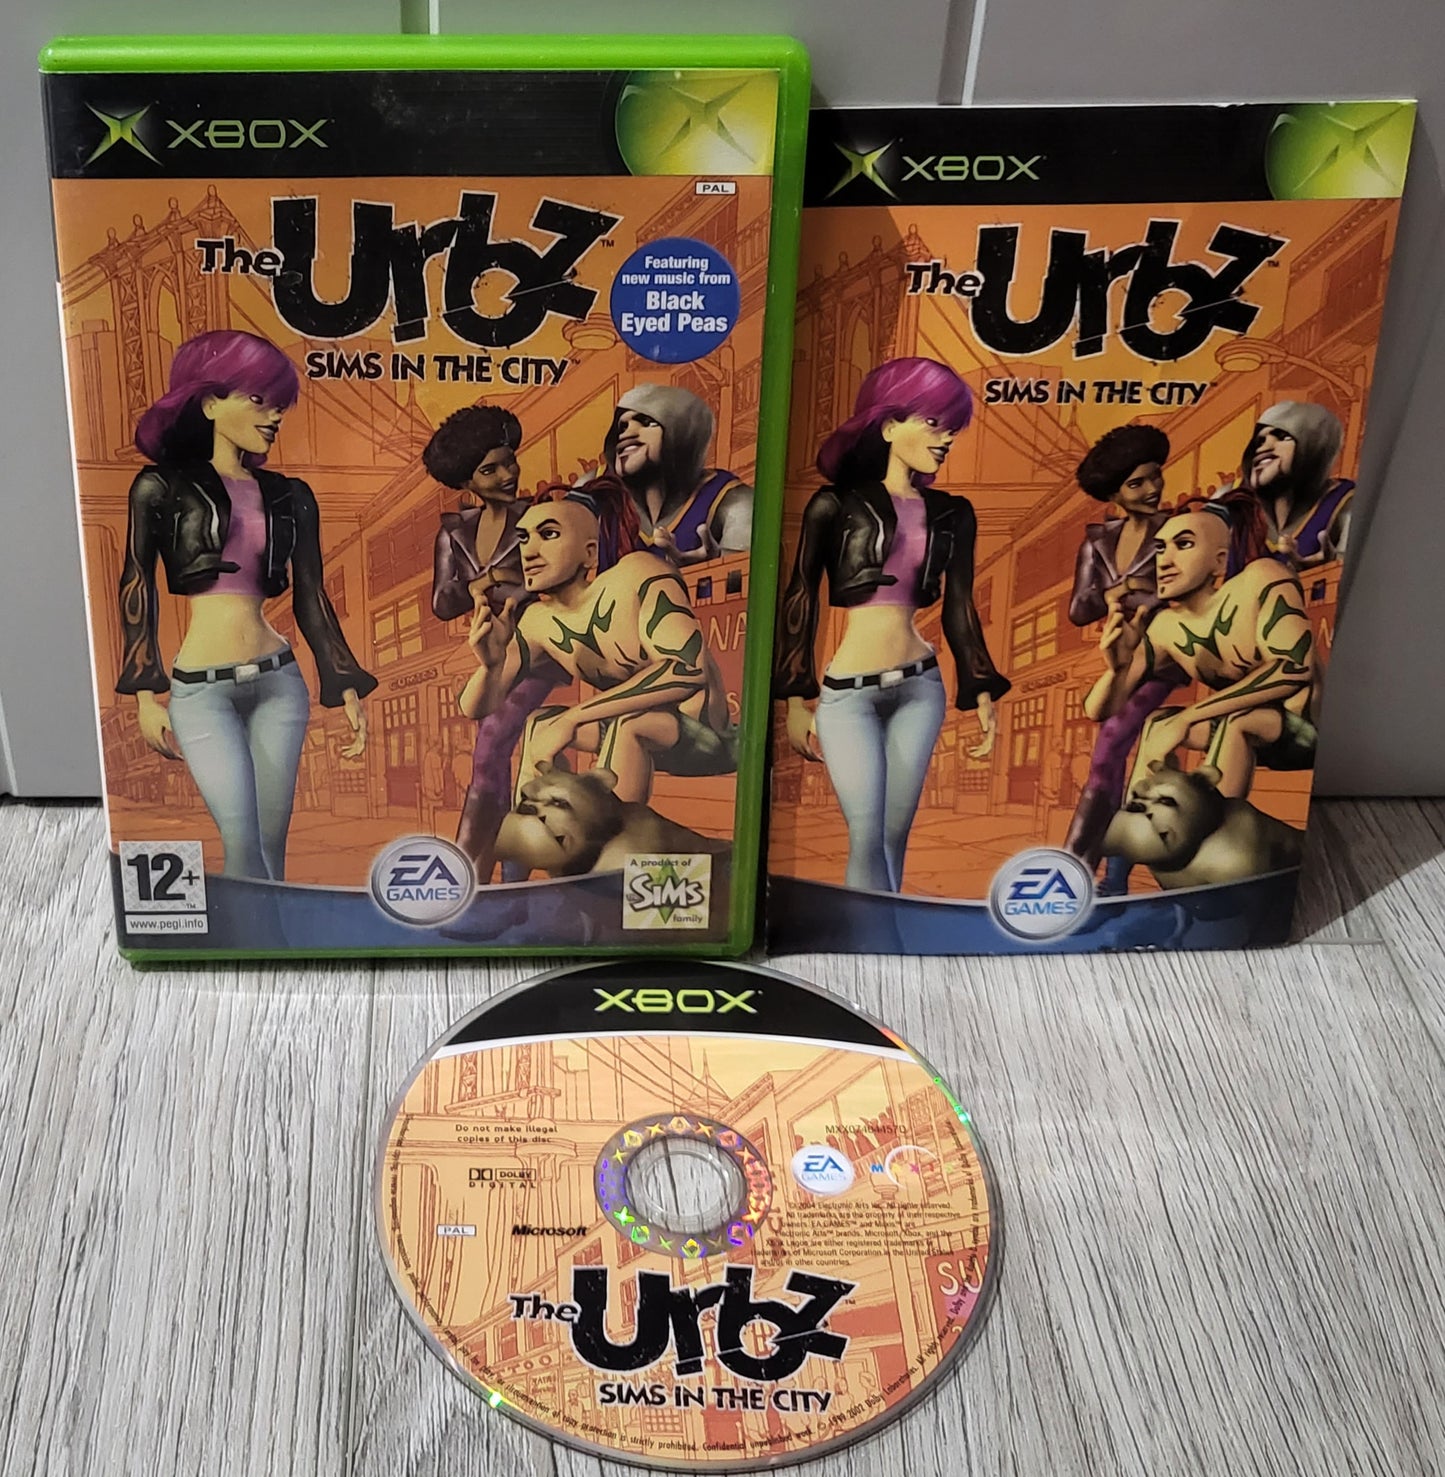 The Urbz Sims in the City Microsoft Xbox Game